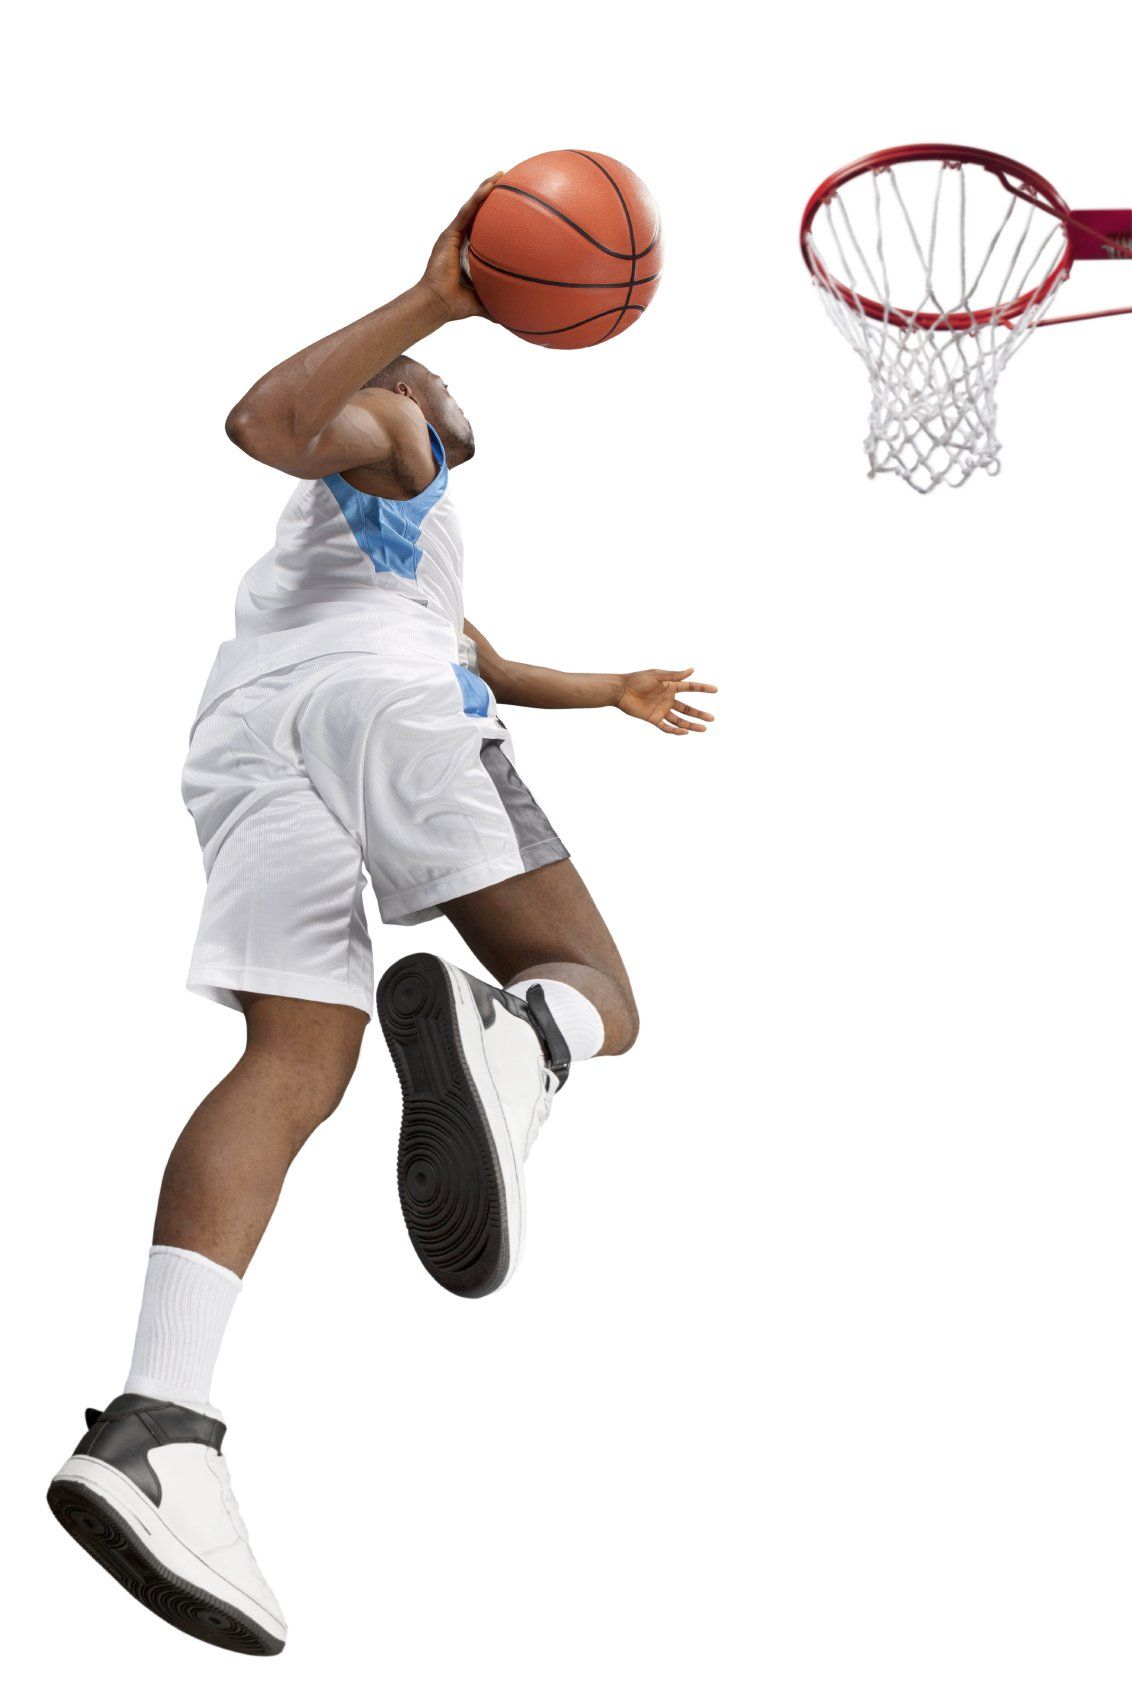 Young basketball player going up to score a point